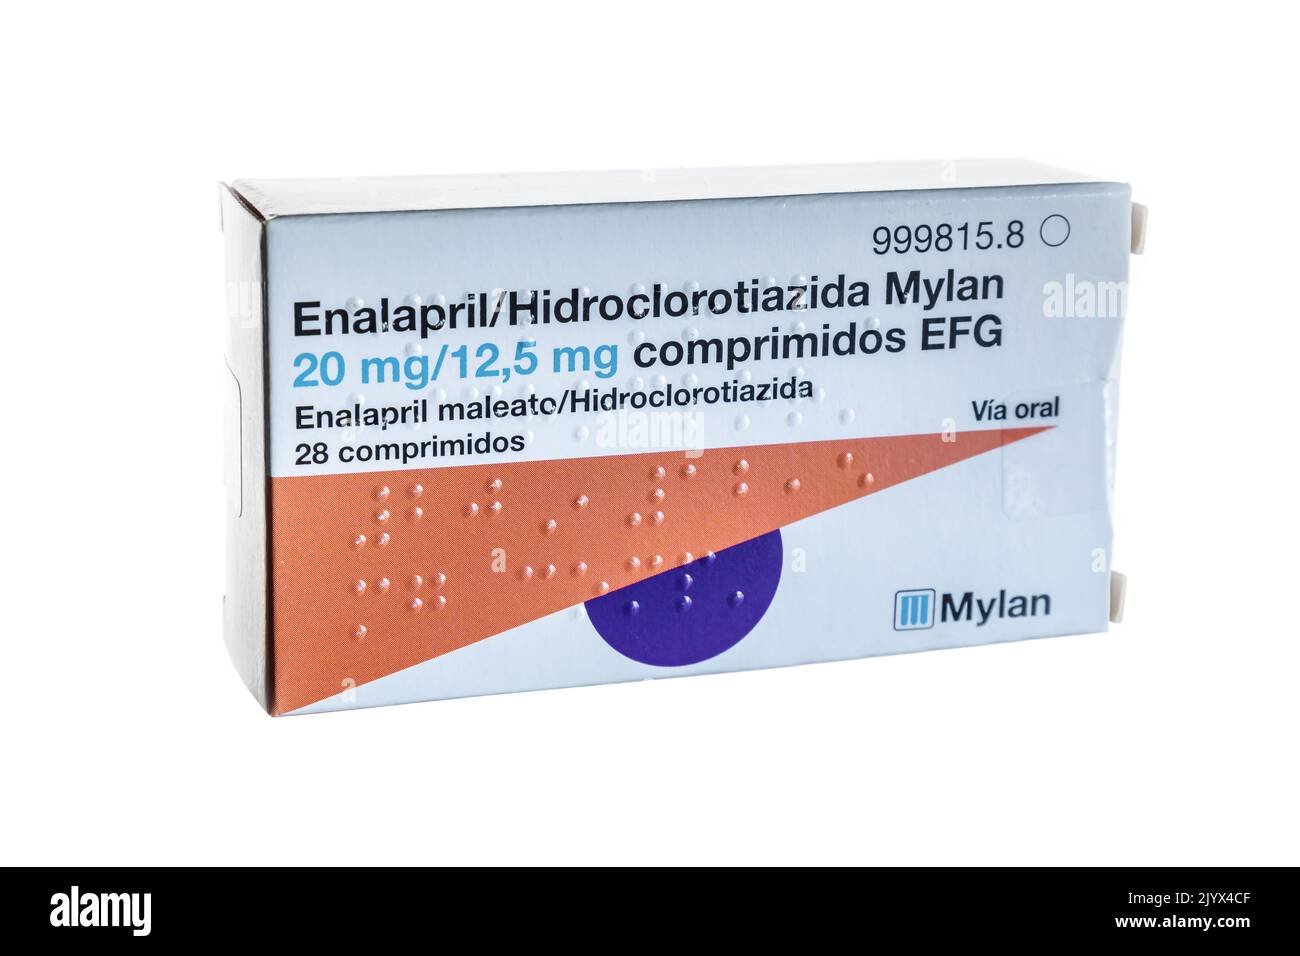 Huelva, Spain - September 08, 2022: A Generic Combination of Enalapril Maleate and Hydrochlorothiazide from Mylan laboratory, Treatment of essential h Stock Photo